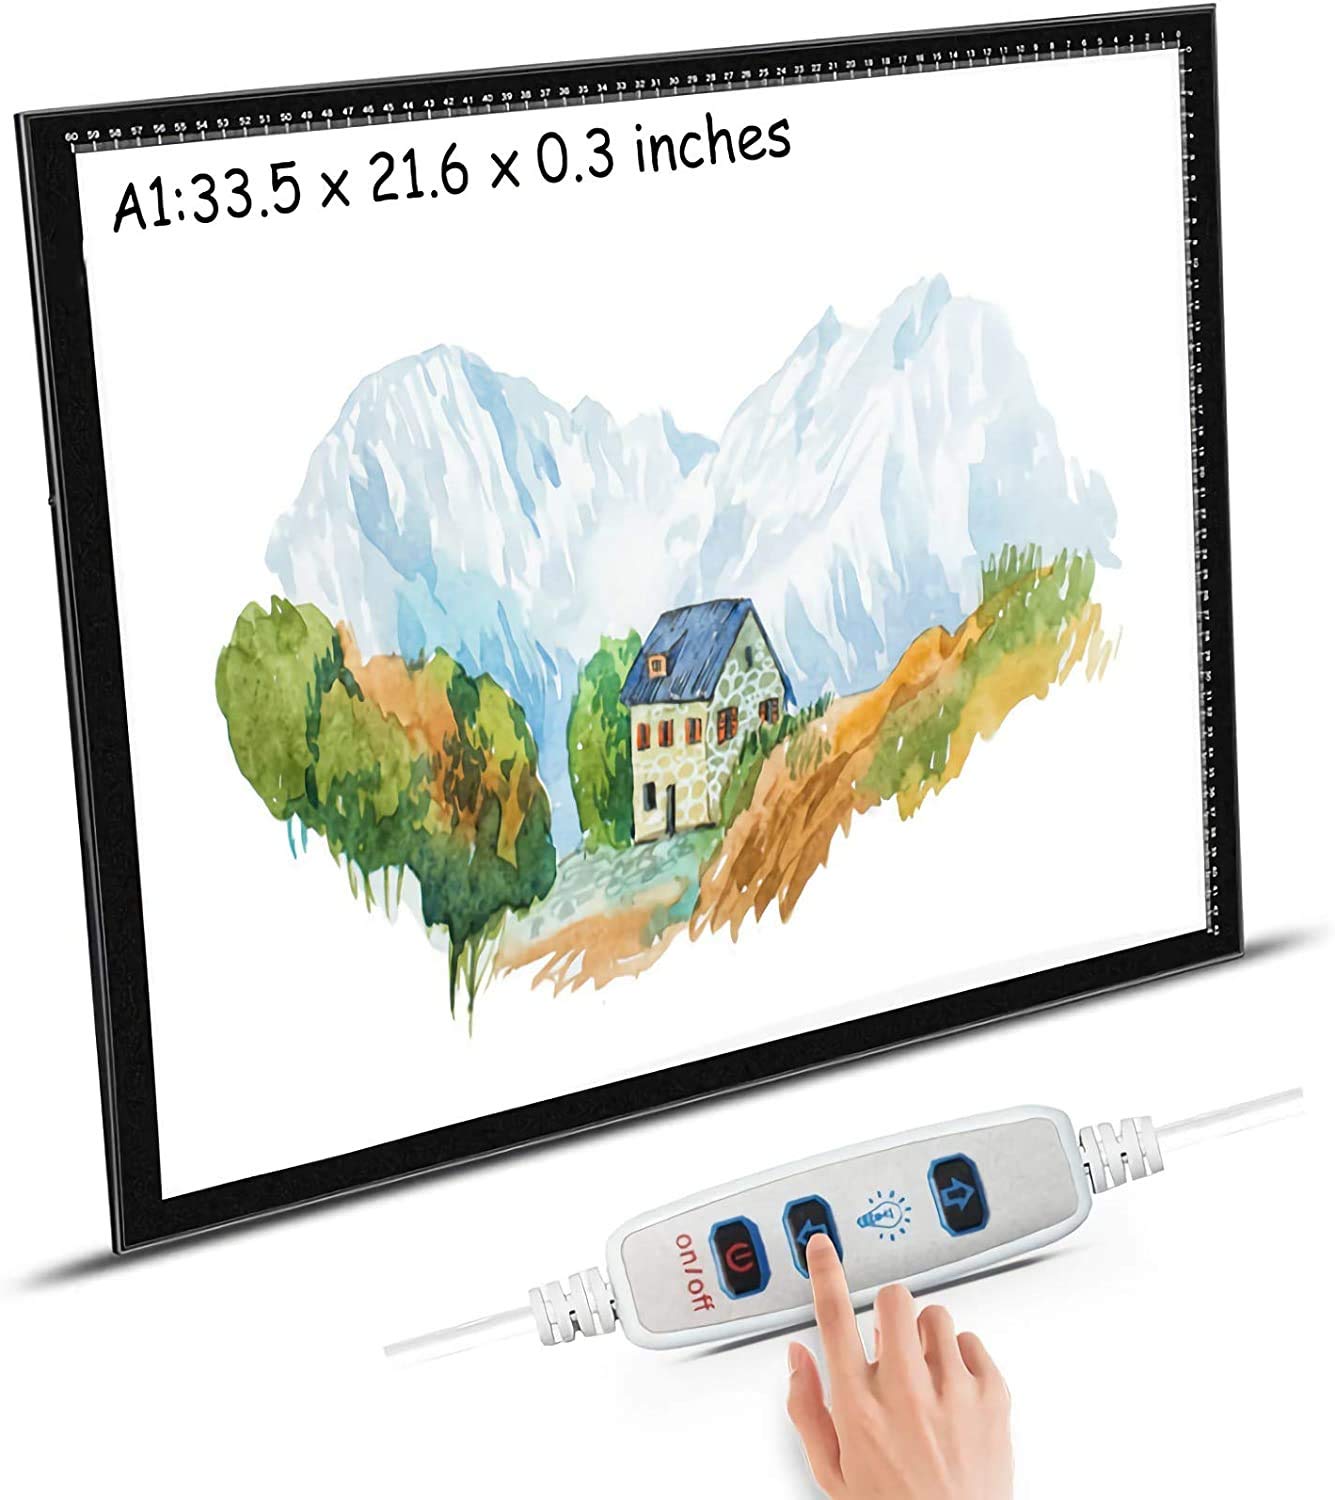 Ultra-Thin Portable Tracer USB LED Artcraft Tracing Pad Light Box dimmable Brightness for 5D DIY Diamond Painting Artists Drawing Sketching Animation,